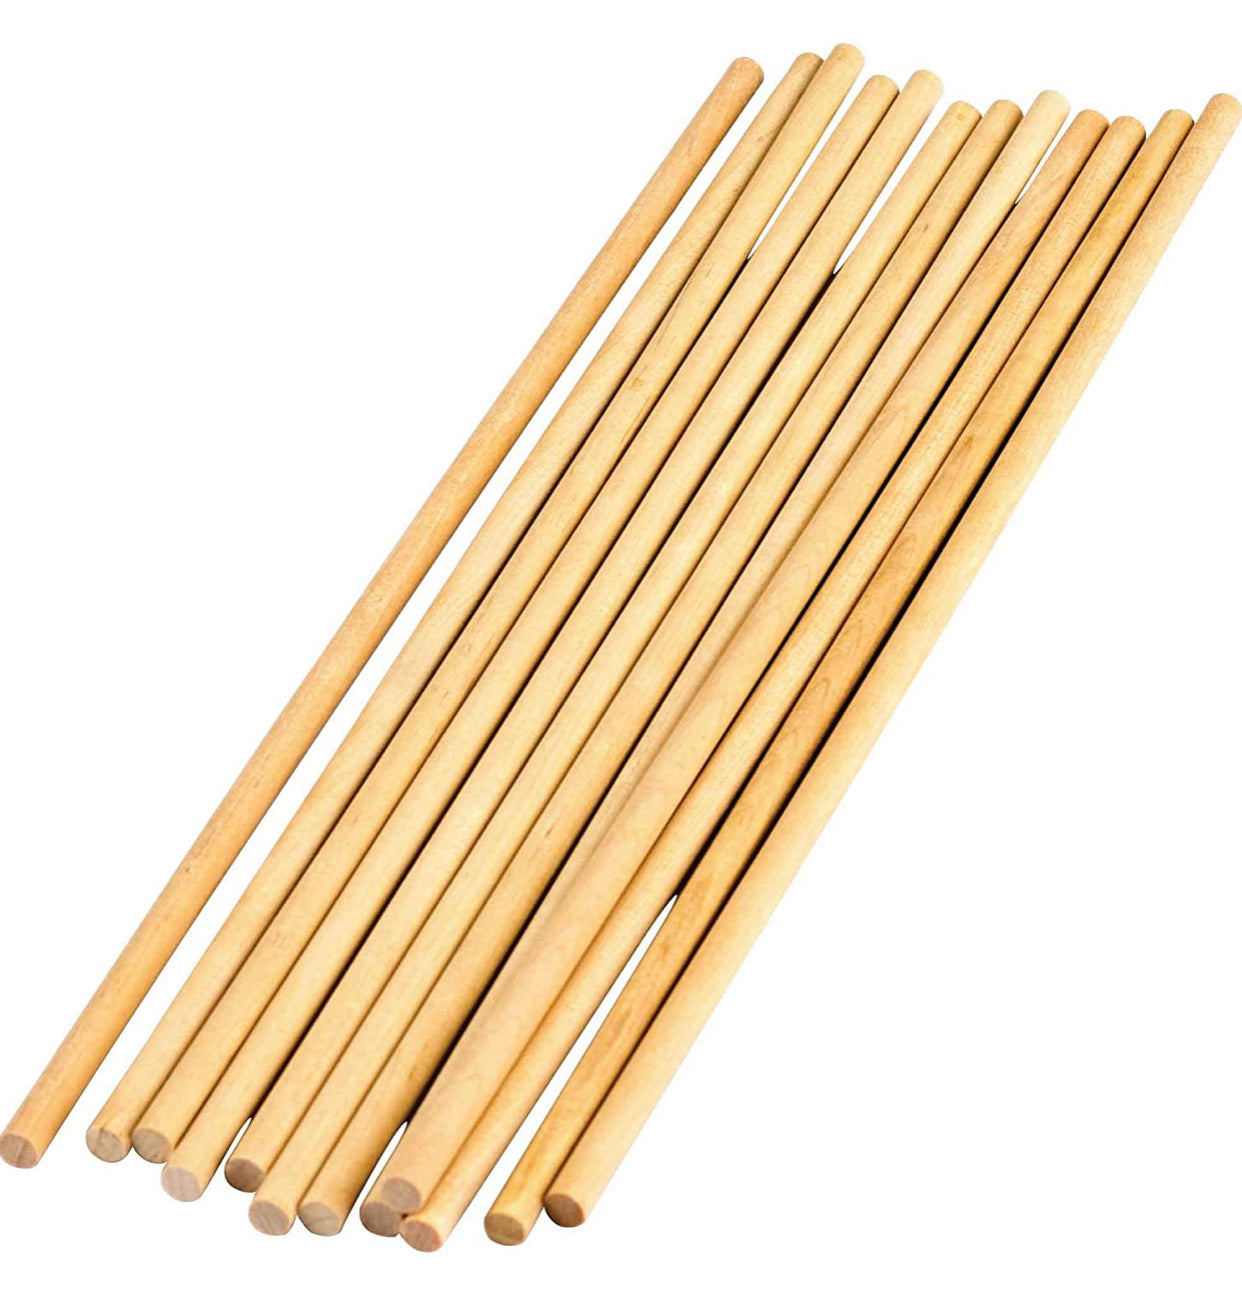 Extra 1/4” x 12” Wooden Dowels for use with pen turner adapter